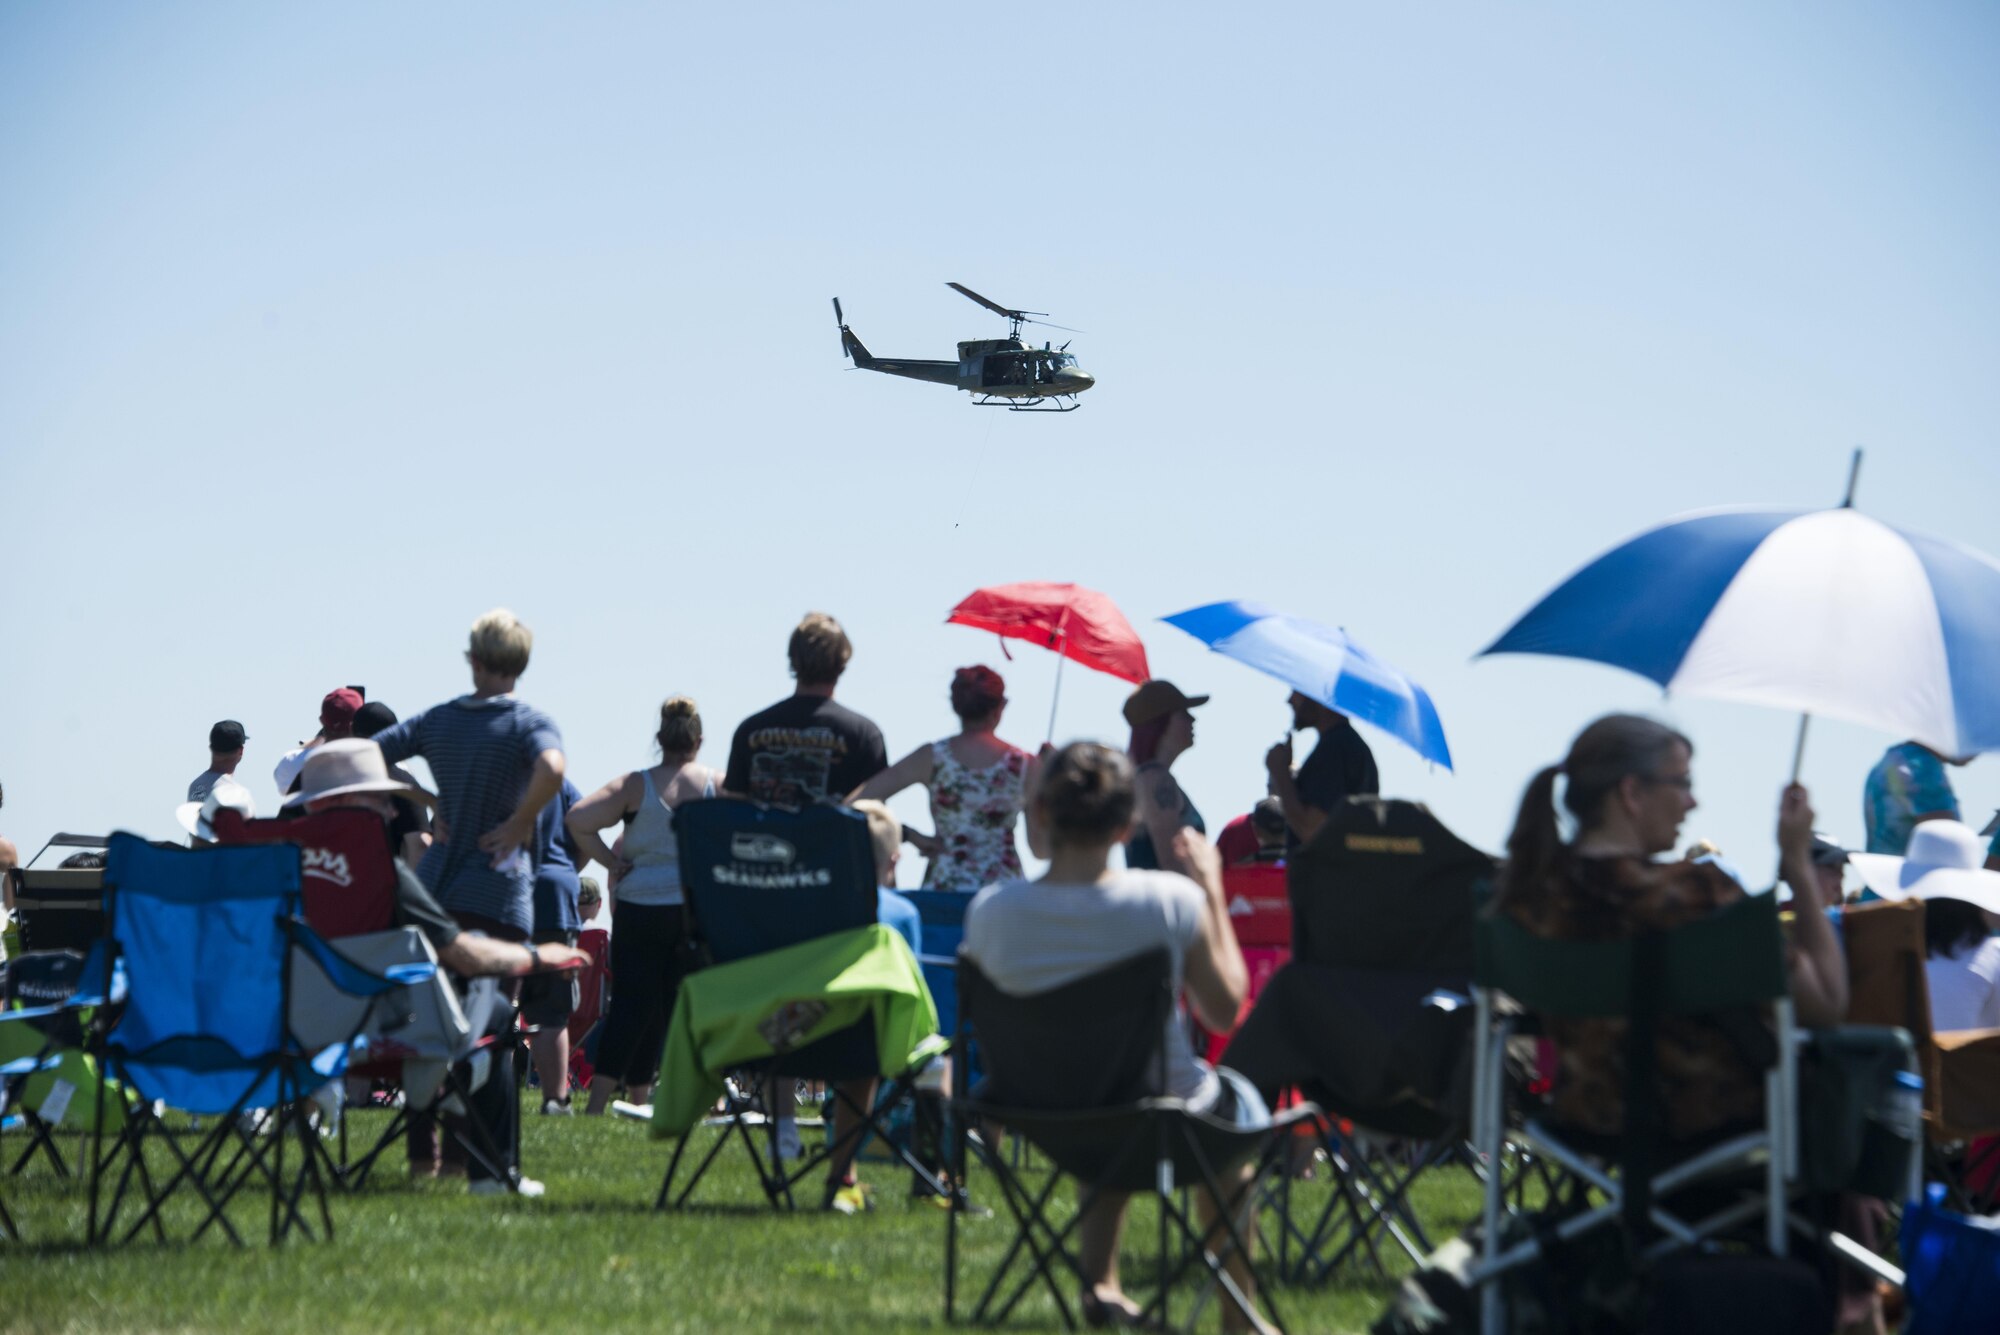 A UH-1N Huey performs during the Skyfest 2017 Air Show and Open House at Fairchild Air Force Base, Washington, July 29, 2017. SkyFest was an opportunity to give the local and regional community a chance to view Airmen and our resources. (U.S. Air Force photo/Senior Airman Janelle Patiño)